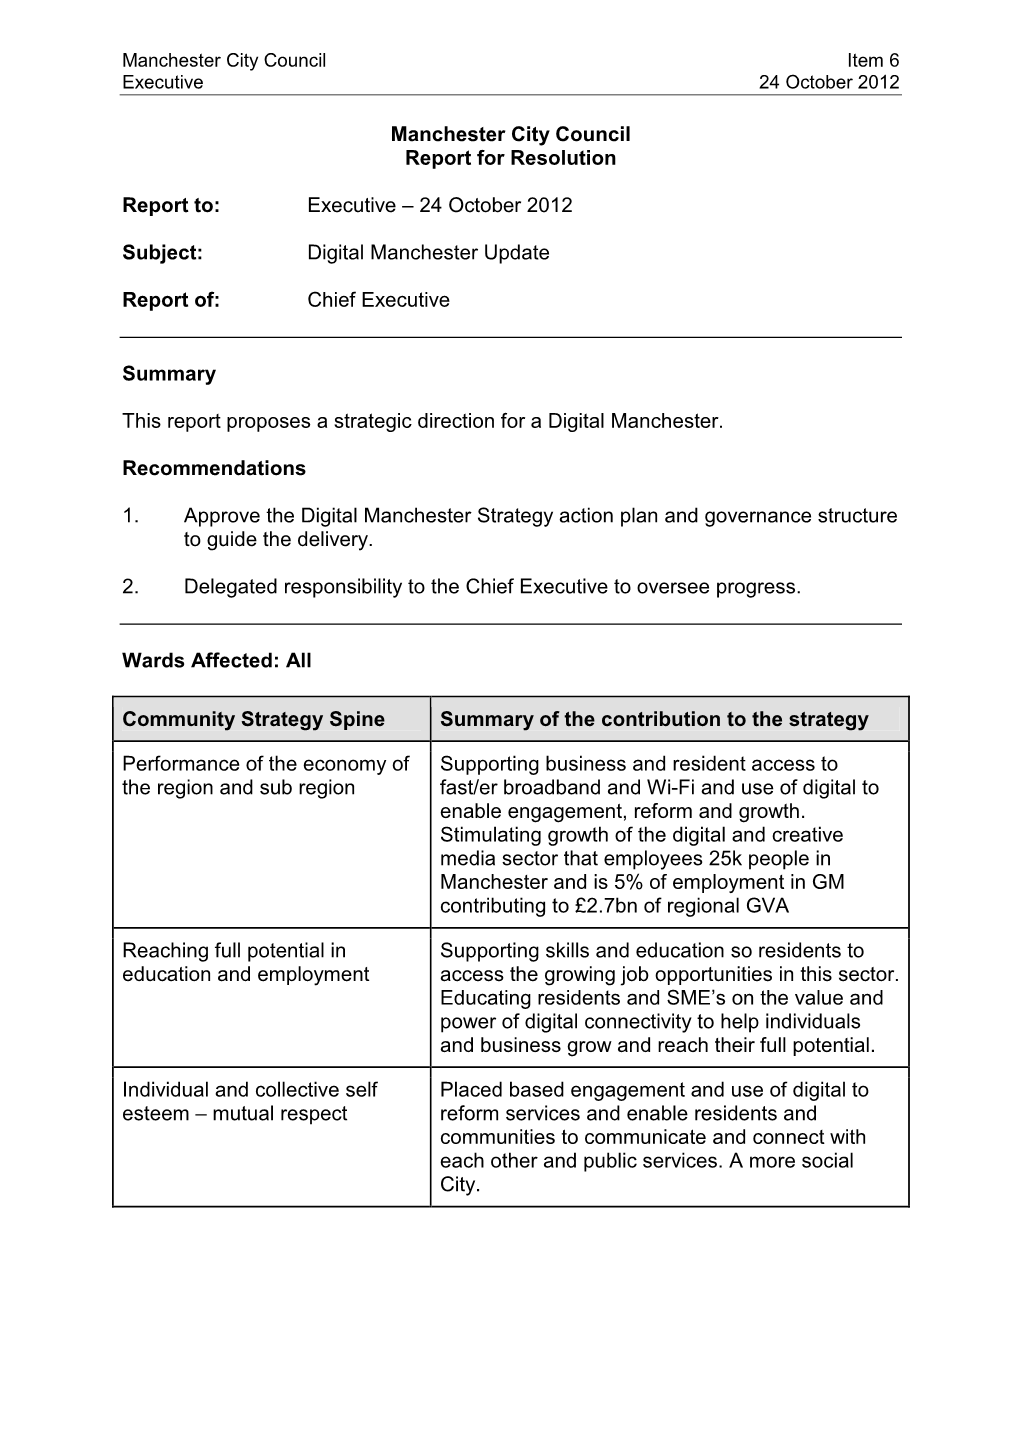 Update Report on Digital Manchester to The